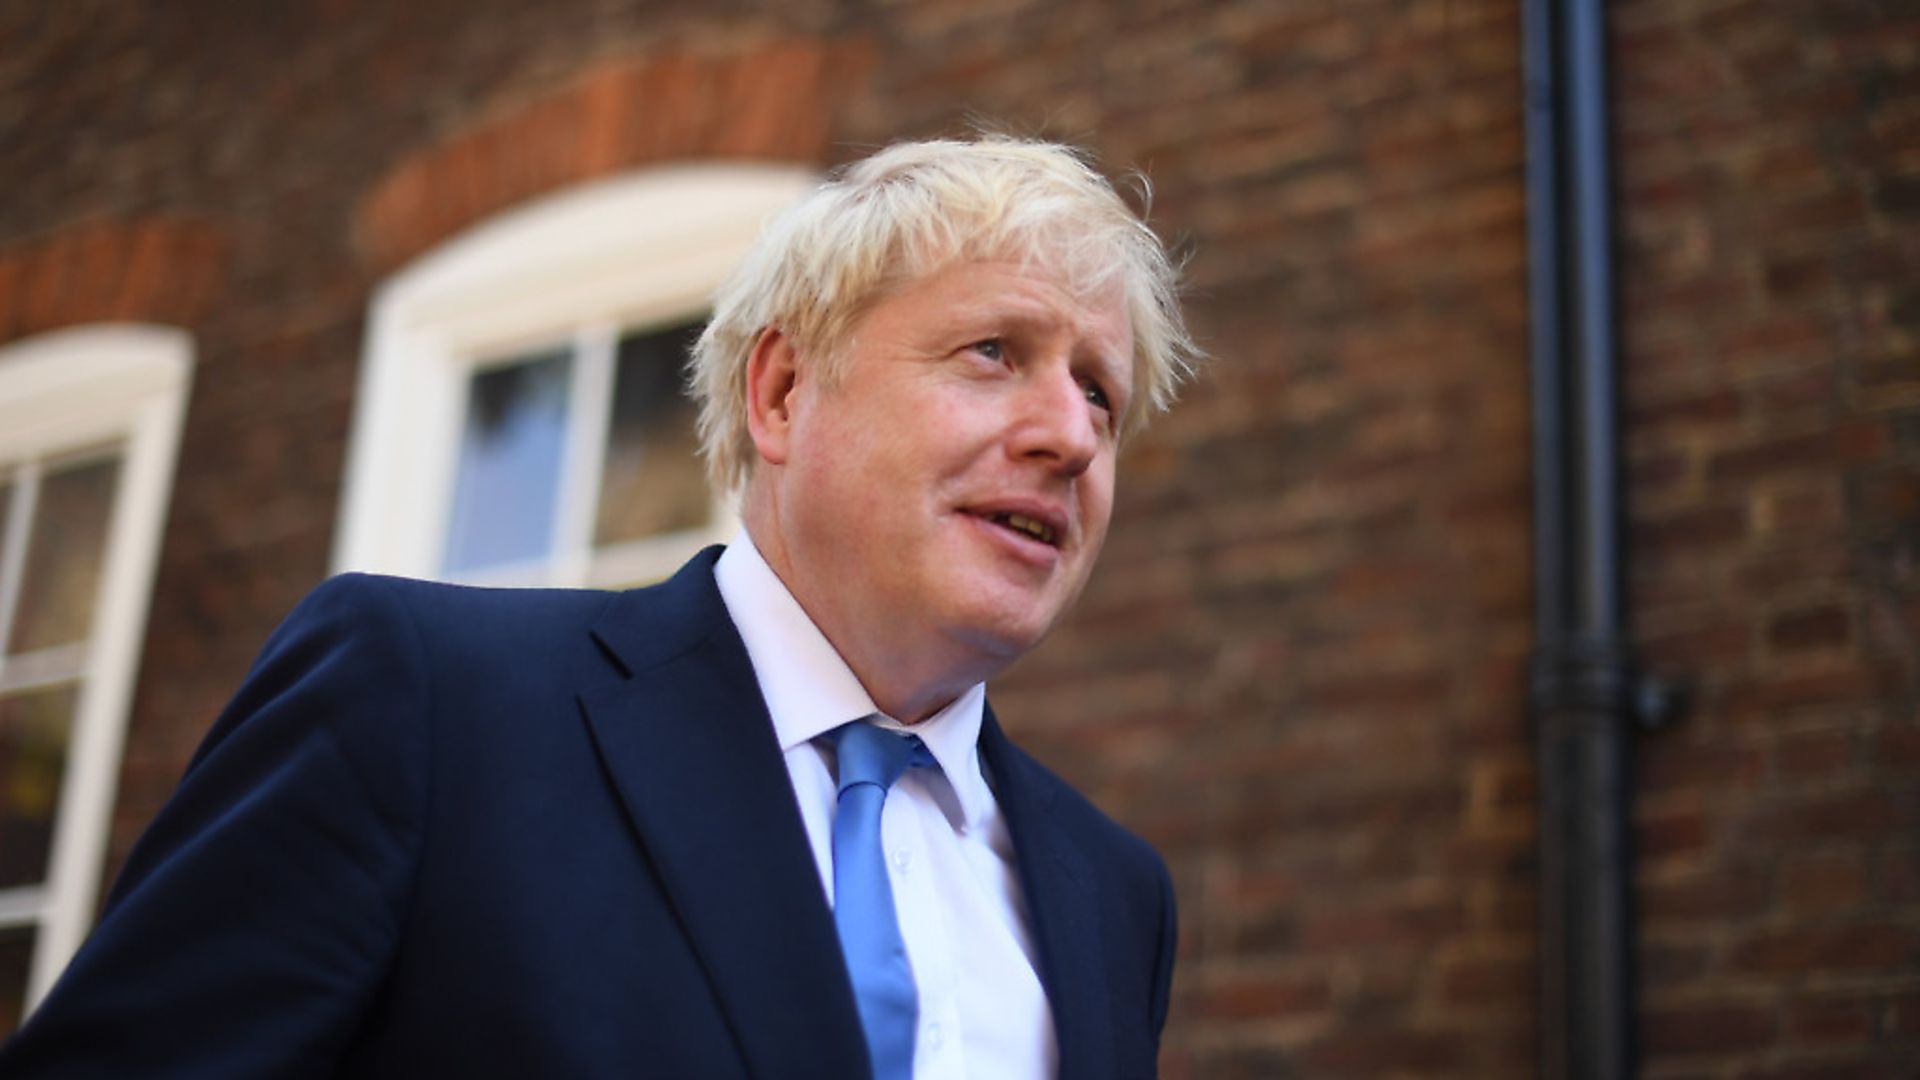 Boris Johnson leaves his office in Westminster. Photograph: Victoria Jones/PA. - Credit: PA Wire/PA Images